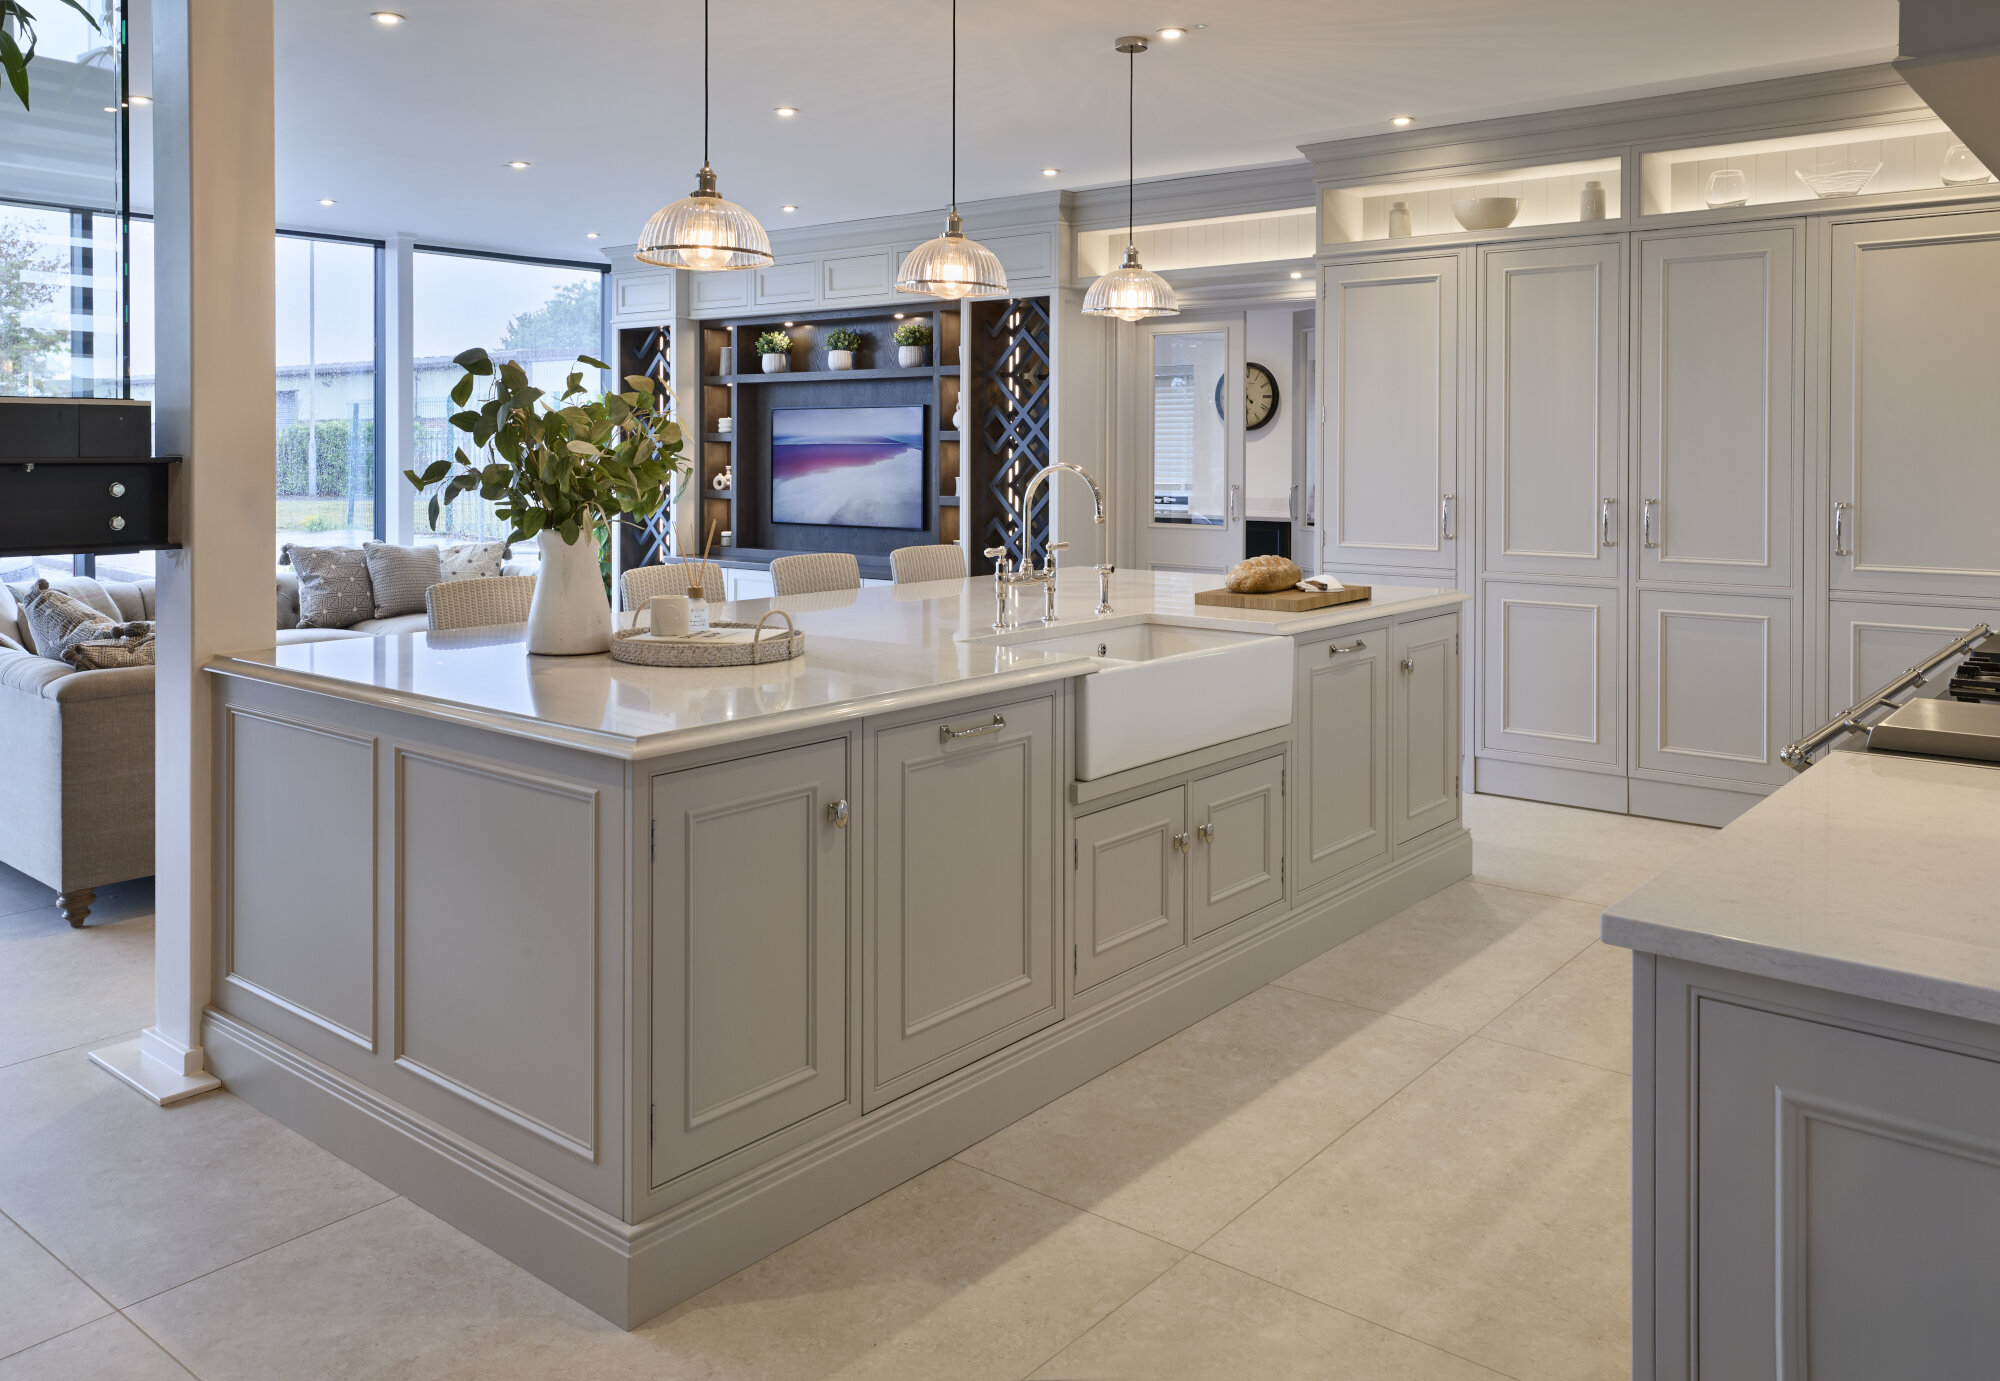 This Bespoke Kitchen Design is on display in our showroom near Hinckley